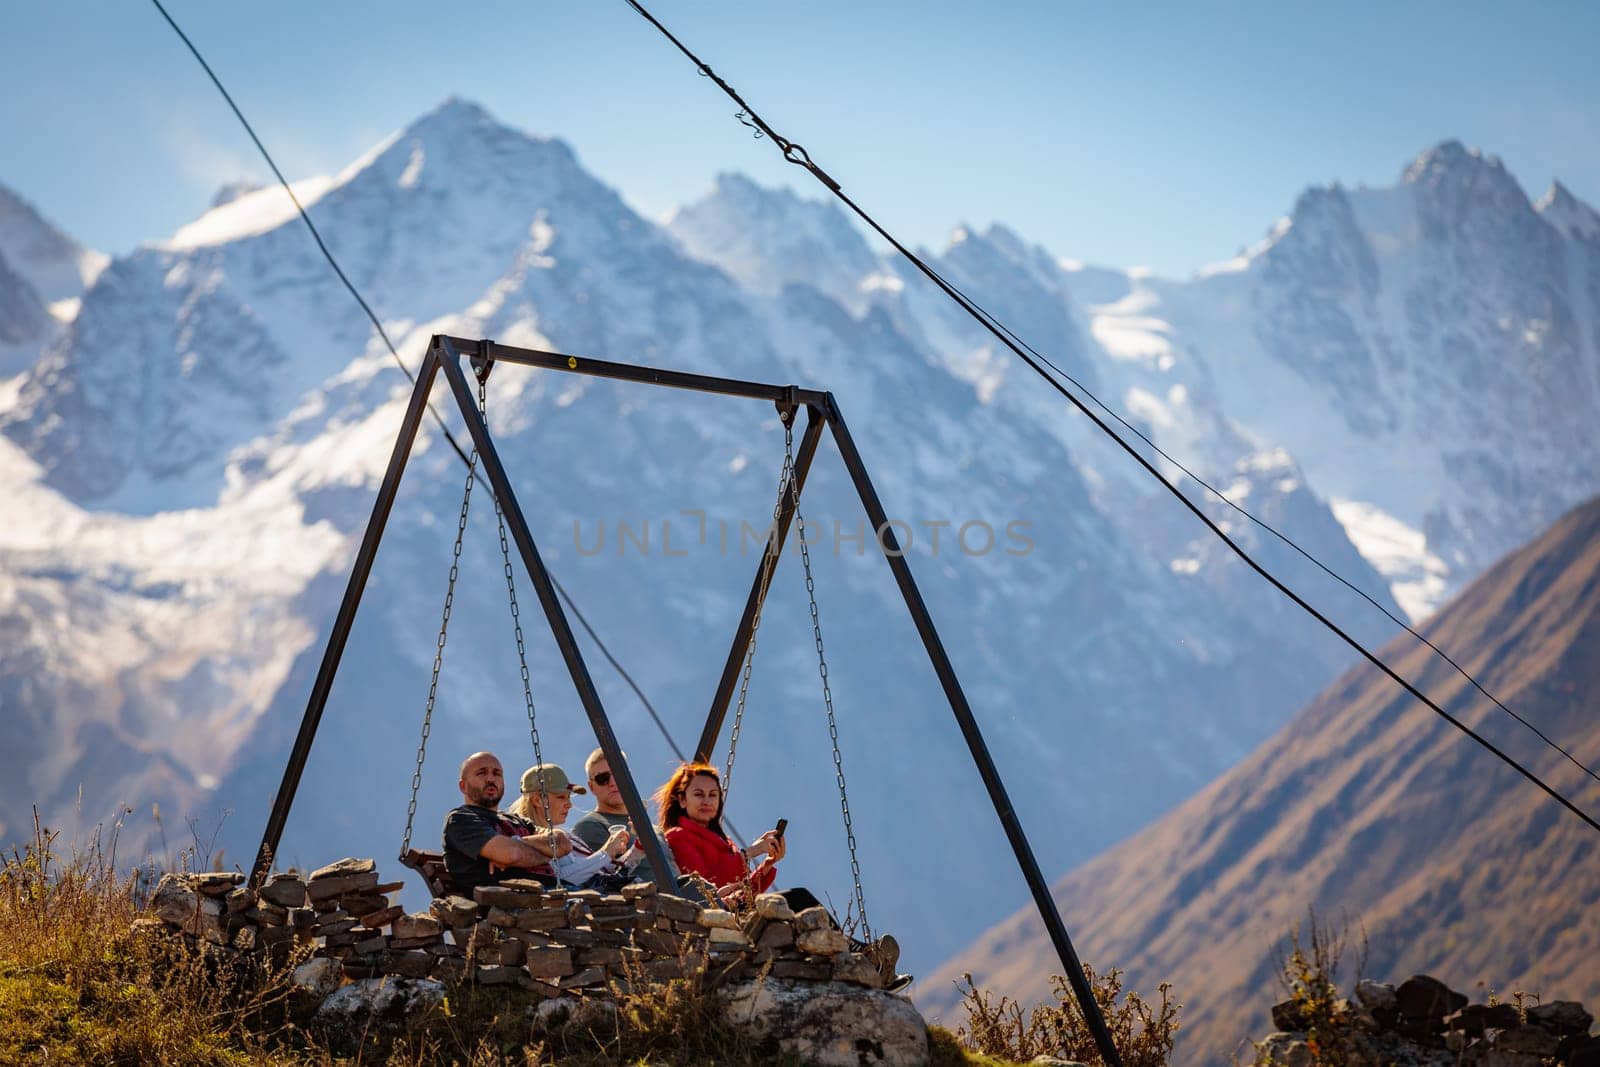 A cheerful group of friends discuss plans while enjoying the views of the majestic mountains